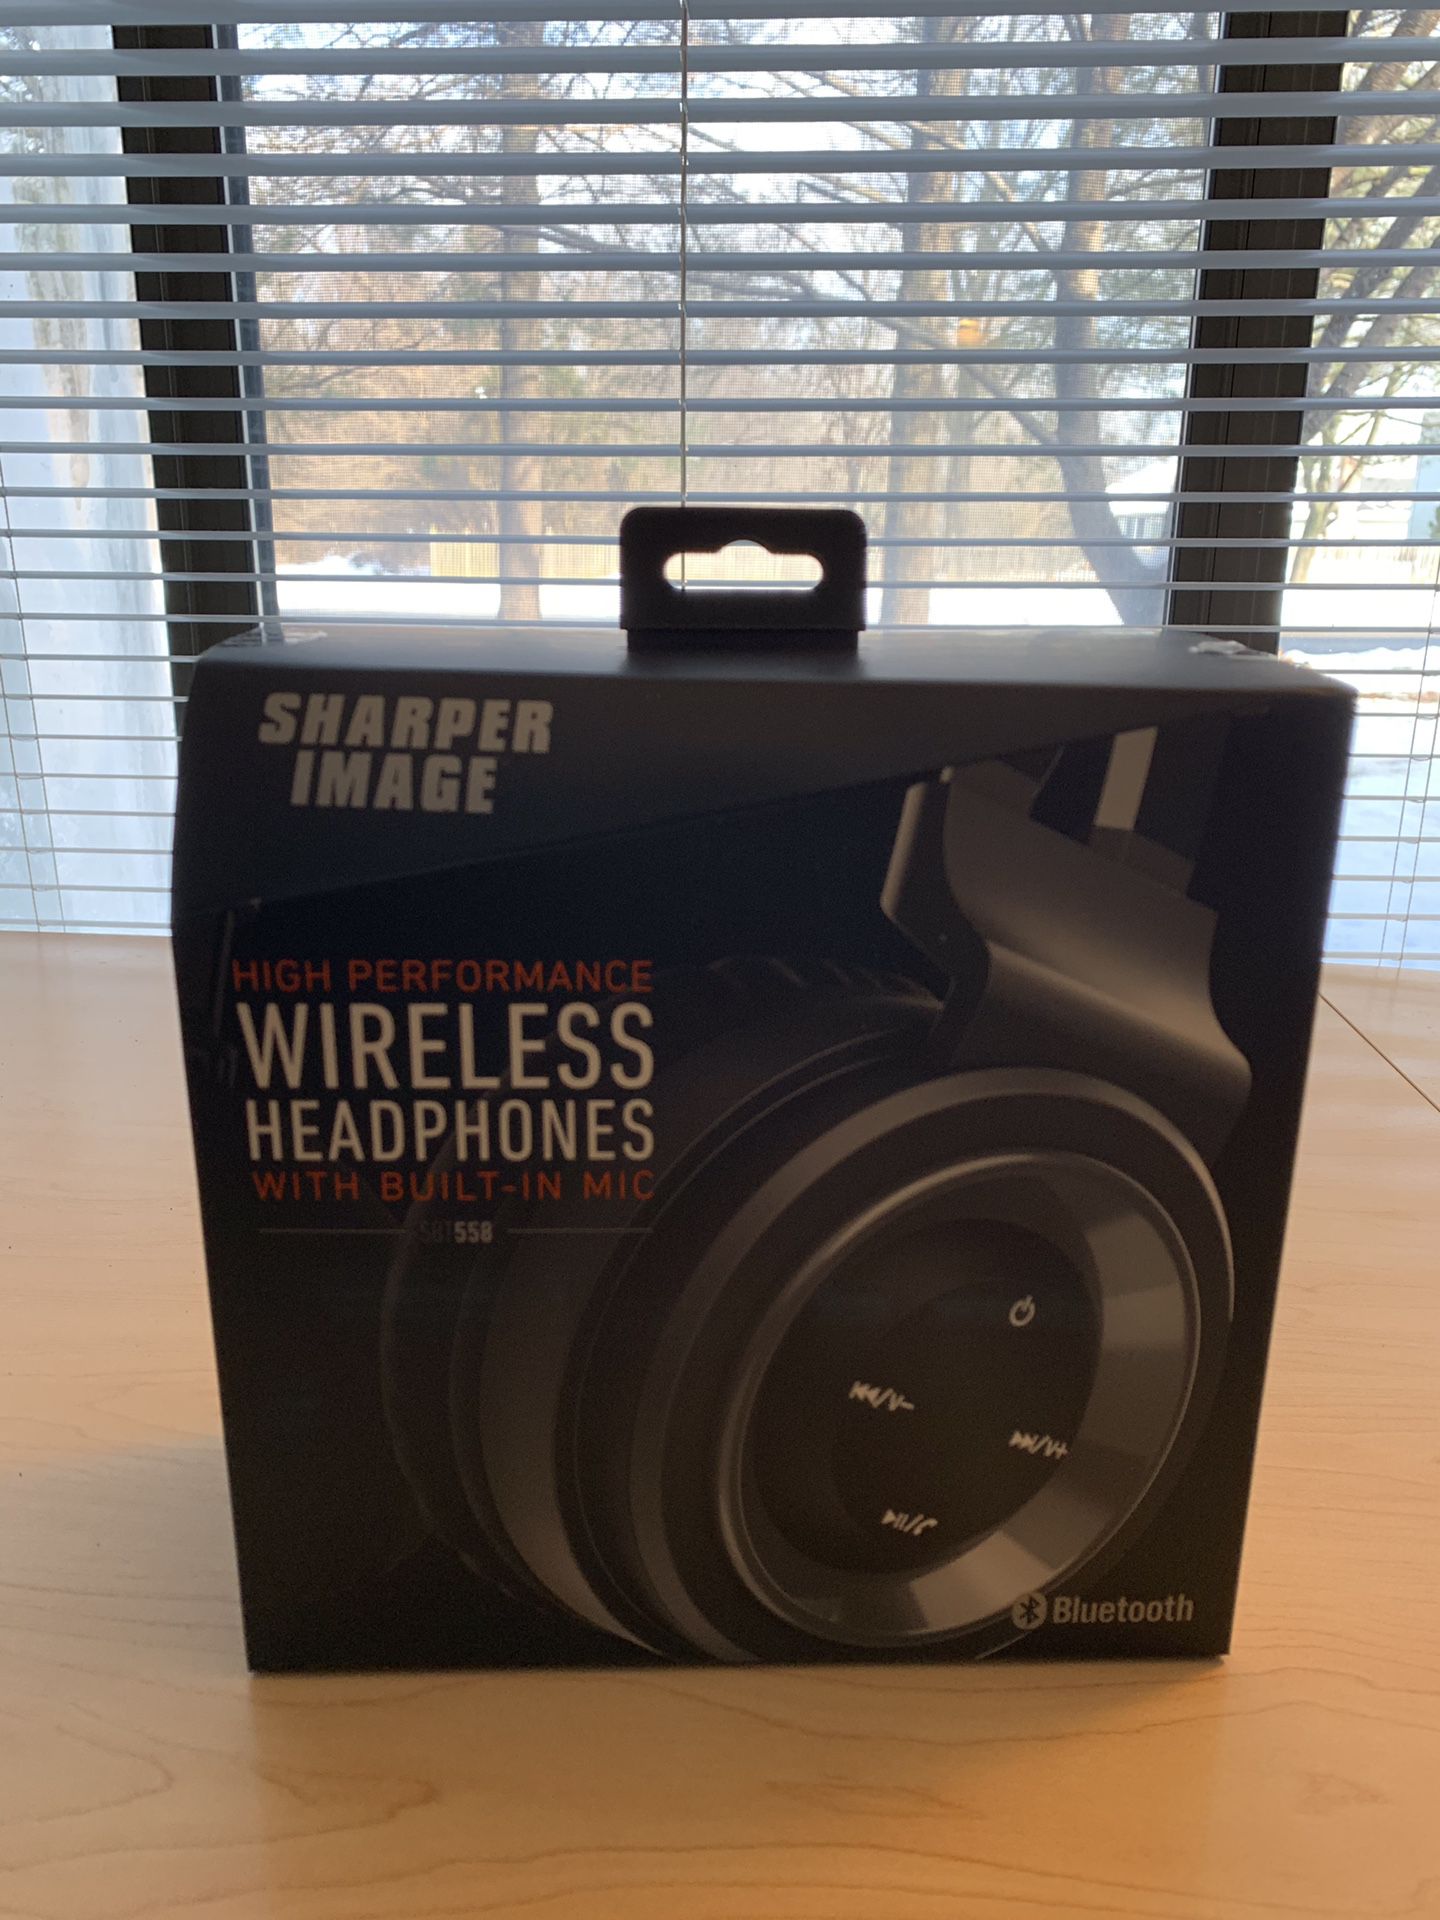 Sharper image wireless headphones with built in mic